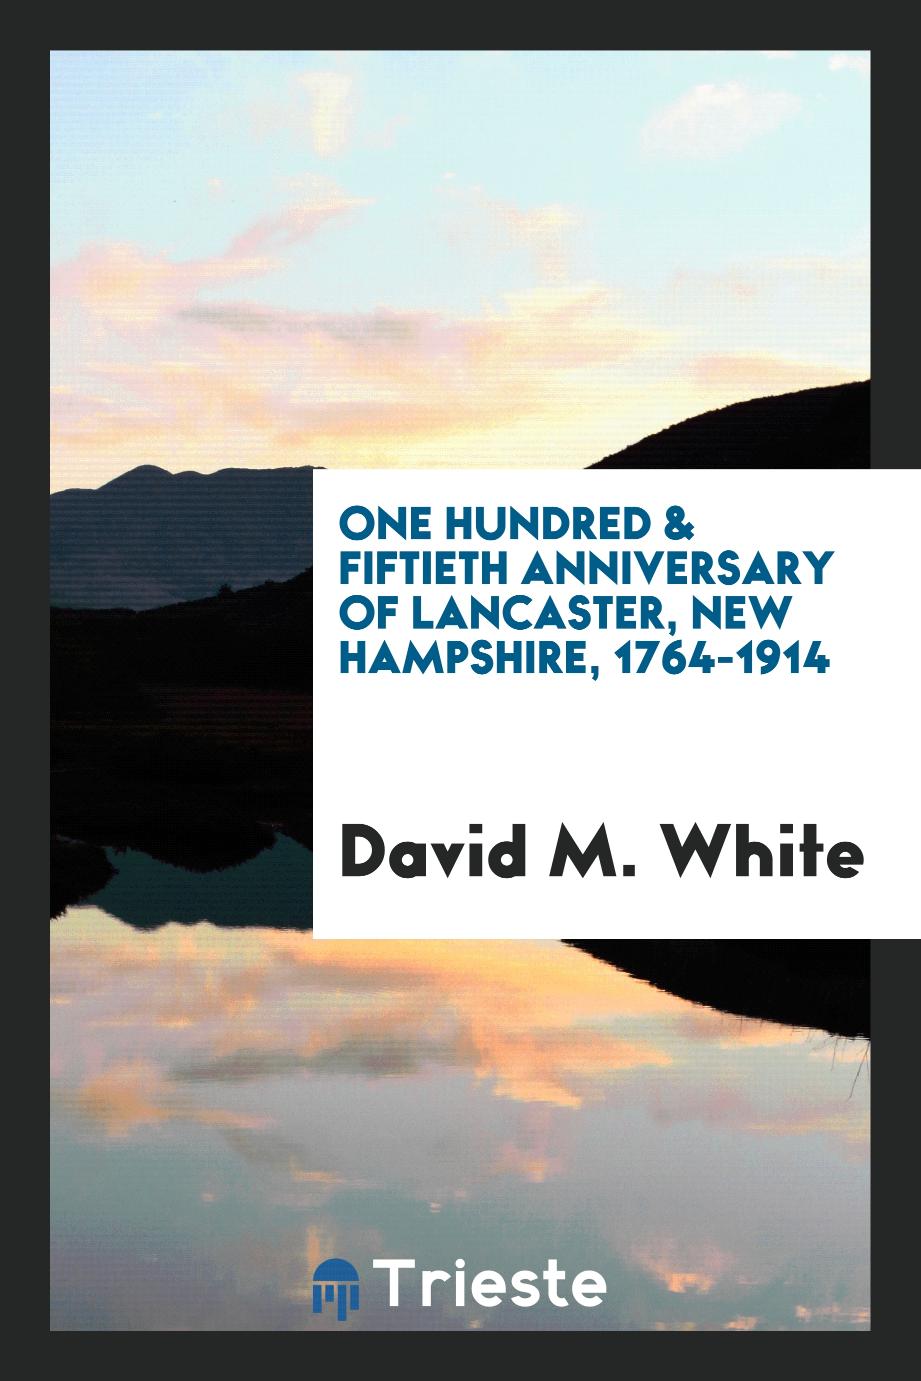 One Hundred & Fiftieth Anniversary of Lancaster, New Hampshire, 1764-1914